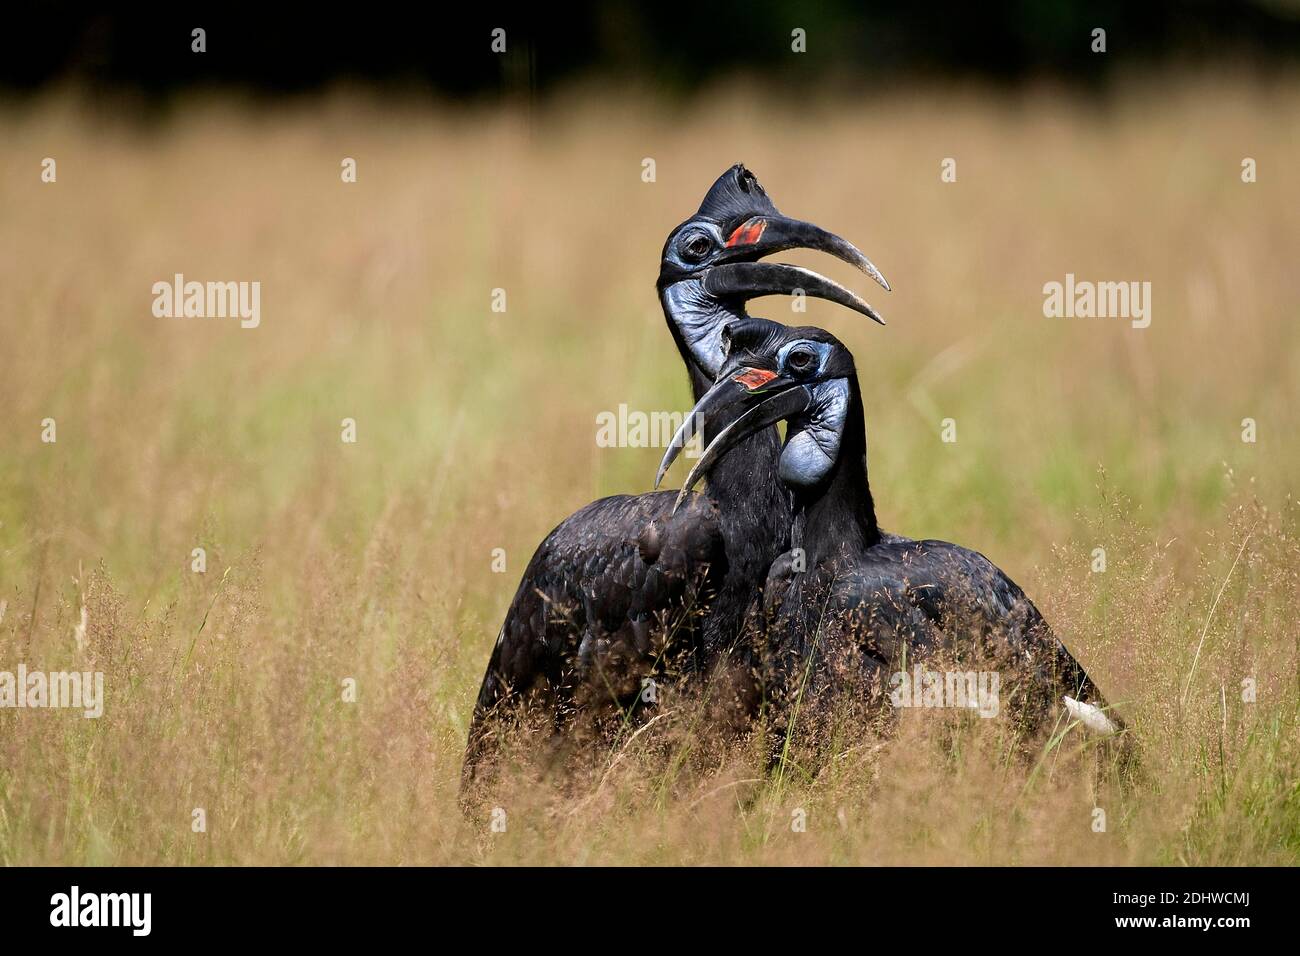 Abyssian Ground Hornbill or Northern Ground Hornbill, bucorvus abyssinicus Stock Photo